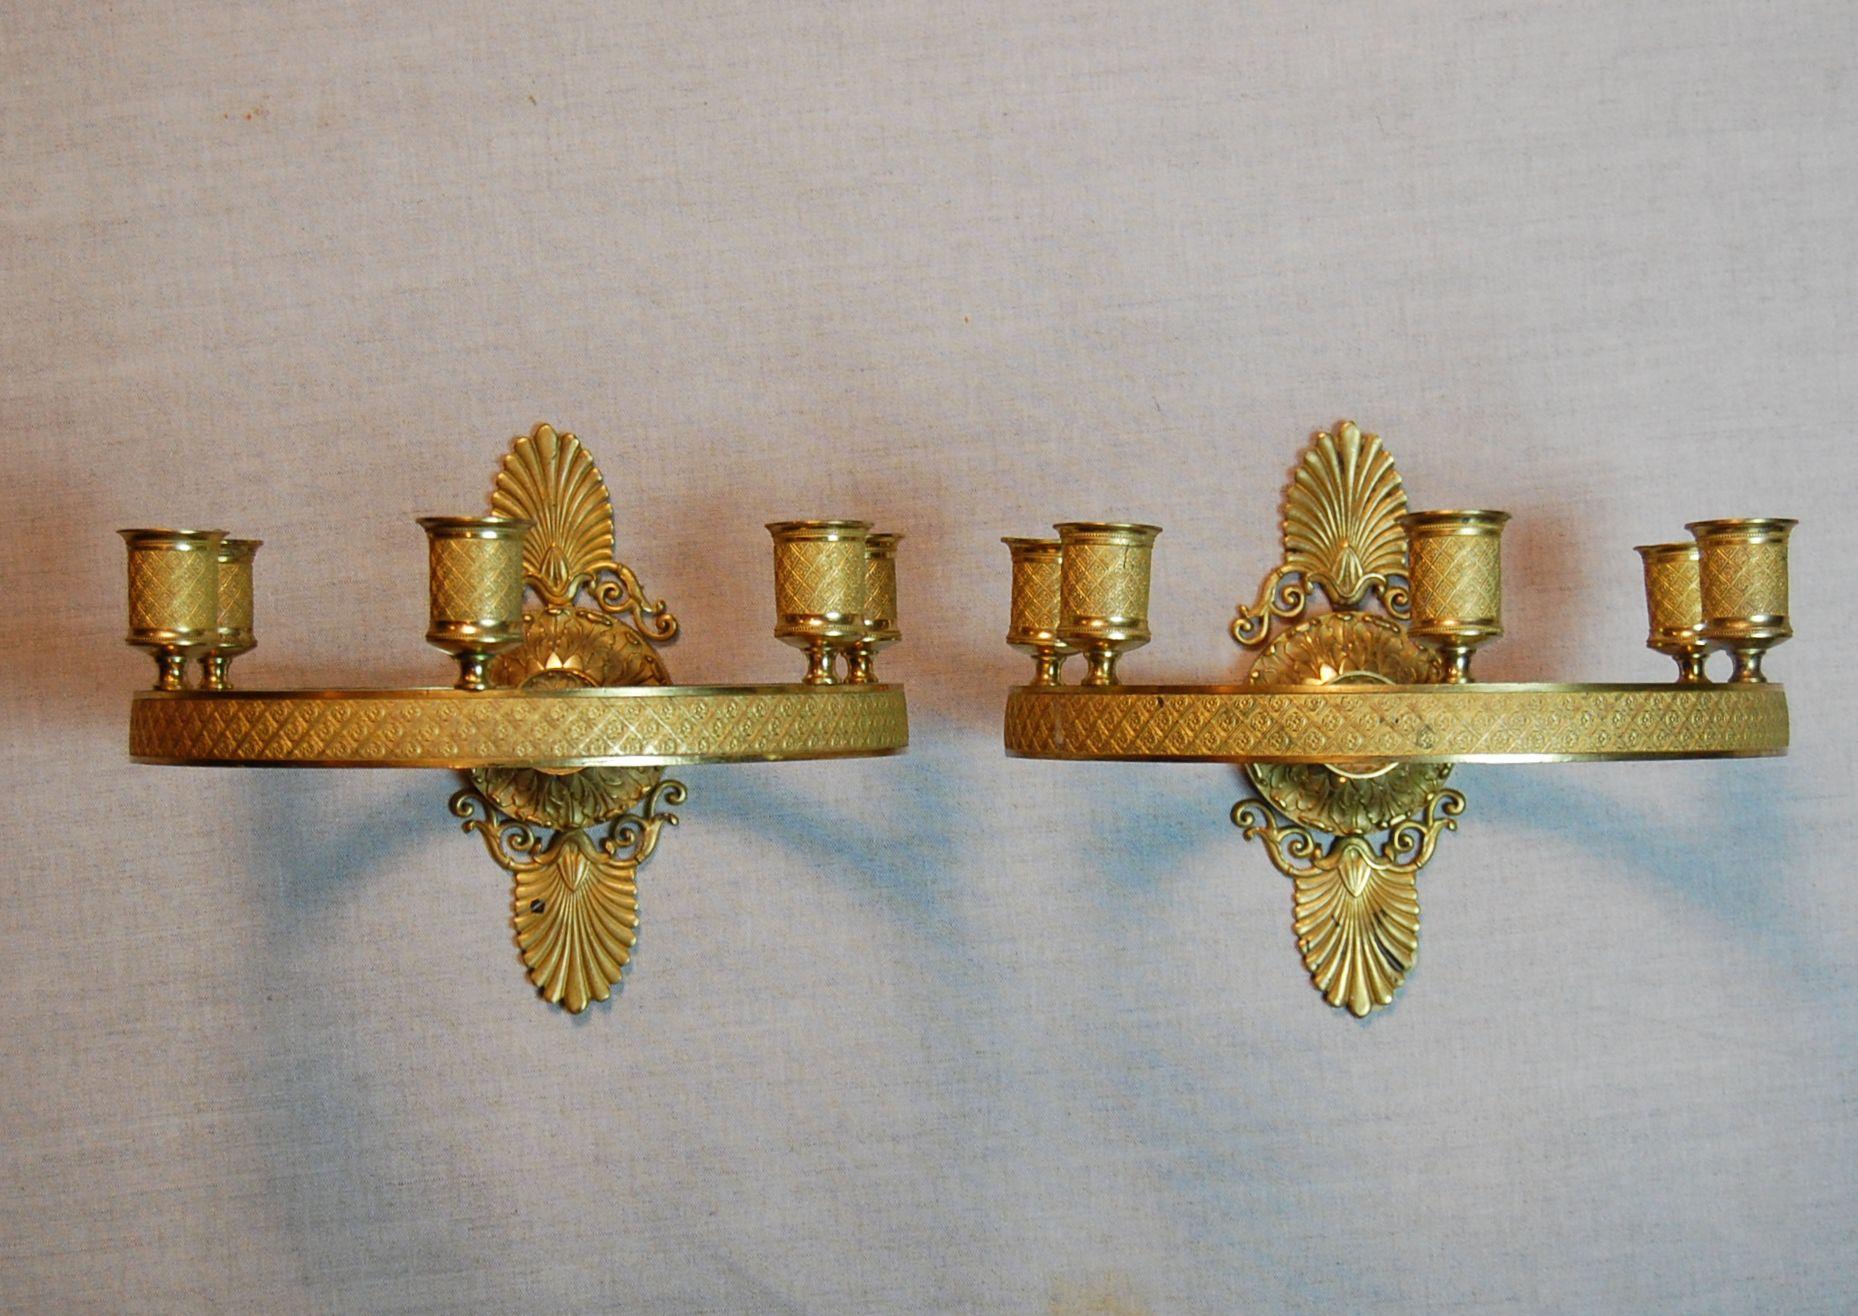 A pair of gilt brass (possibly bronze) Charles X wall sconces in excellent condition, and in a rare circular form with five lights. Heavily chased and etched candle cups and rings, these are a beauty.